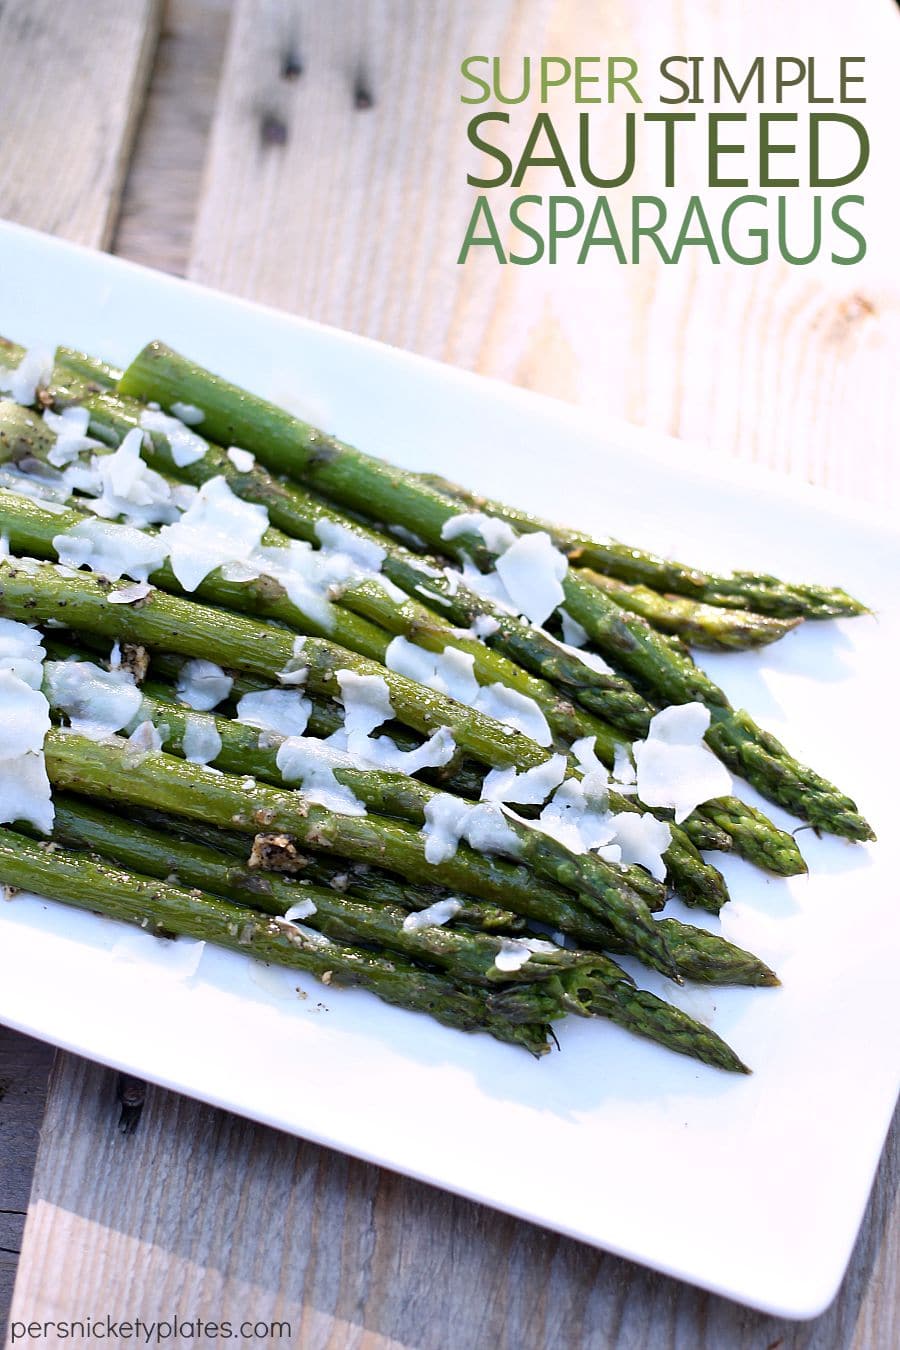 Super simple sauteed asparagus that's full of flavor and can be on the table in 15 minutes.